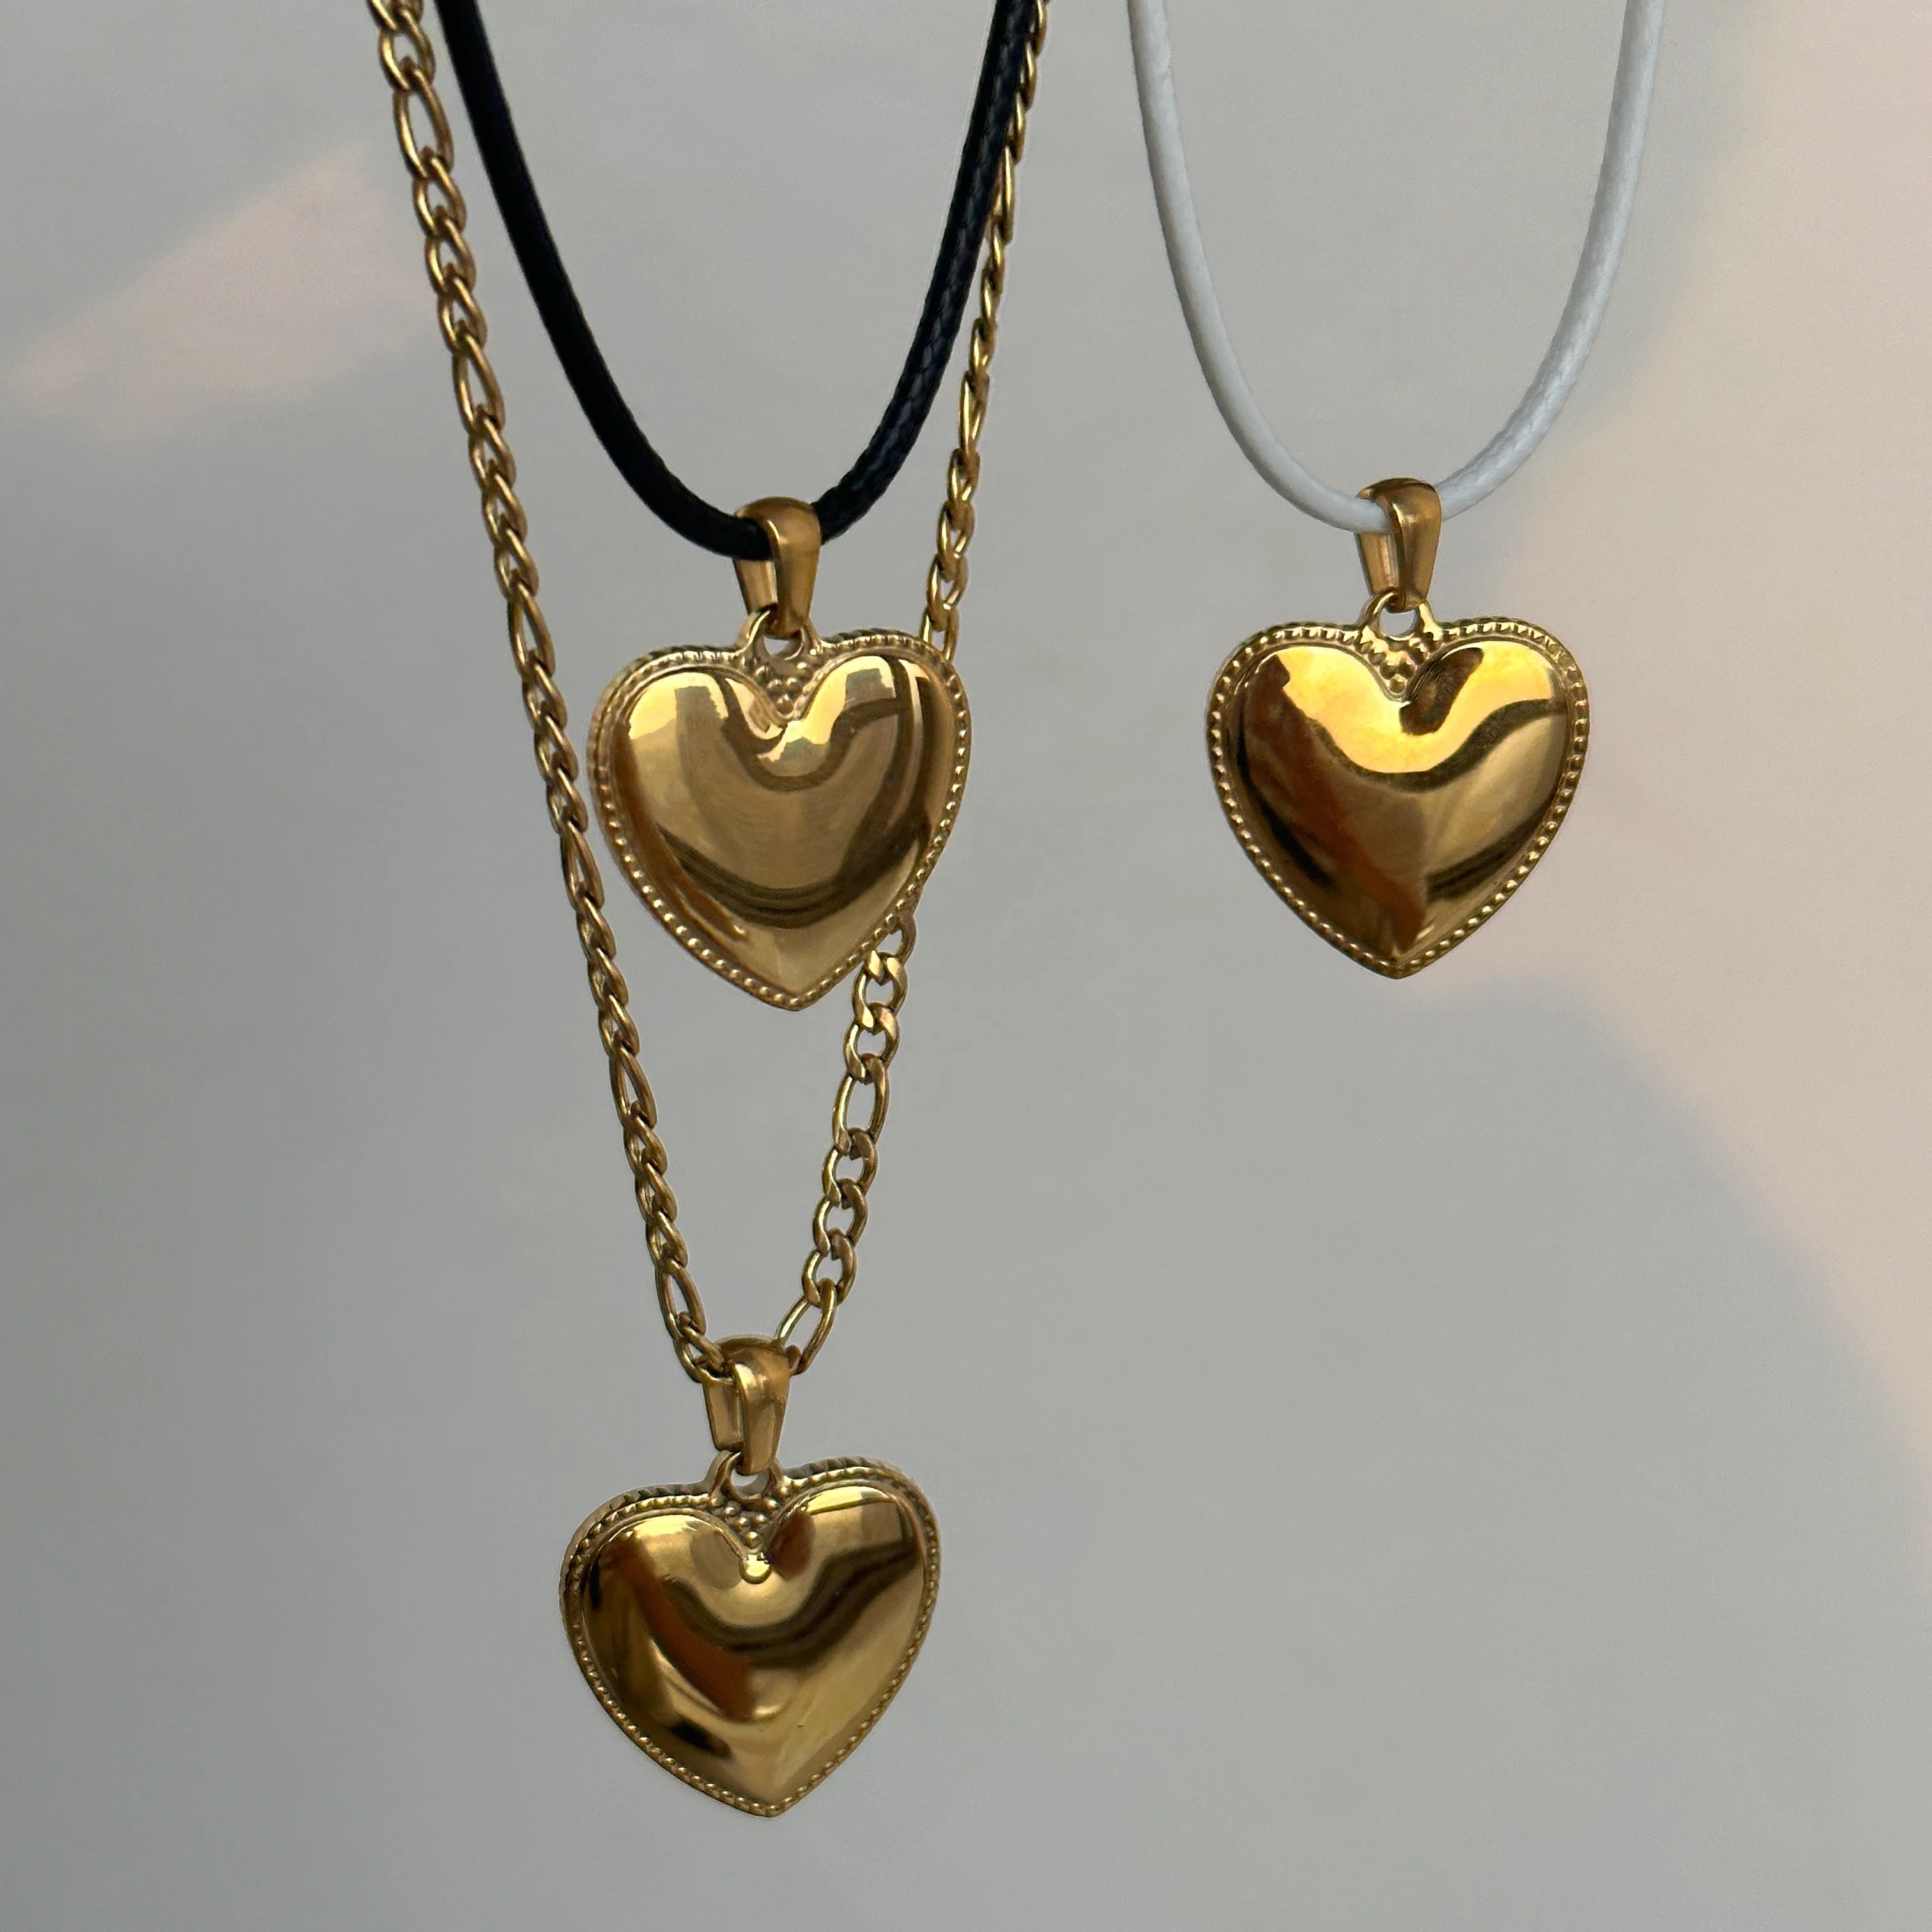 

2023 Dazan New 18k Gold Plated Tarnish Free Stainless Steel Valentine S Day Love Heart Pendant Rope Chain Necklace For Women